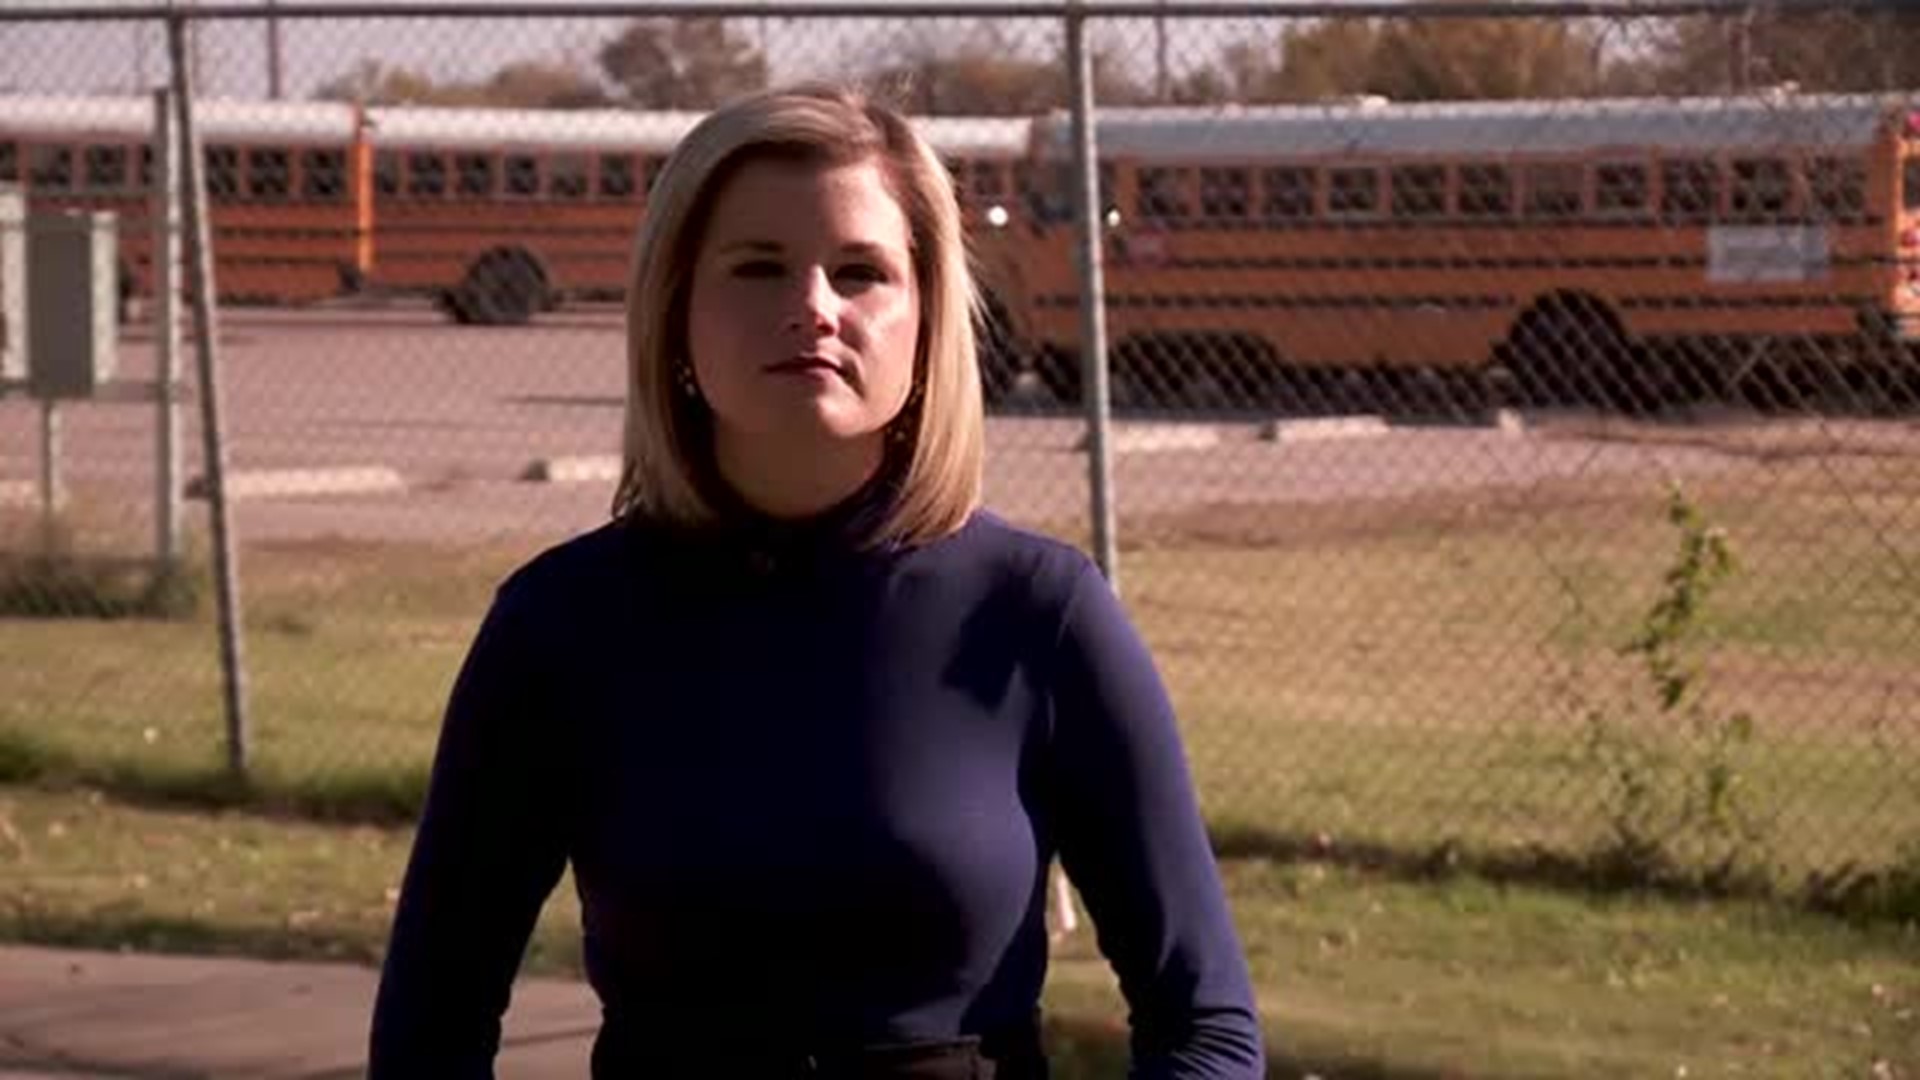 Oklahoma Schools Close for Election Day (KFOR)